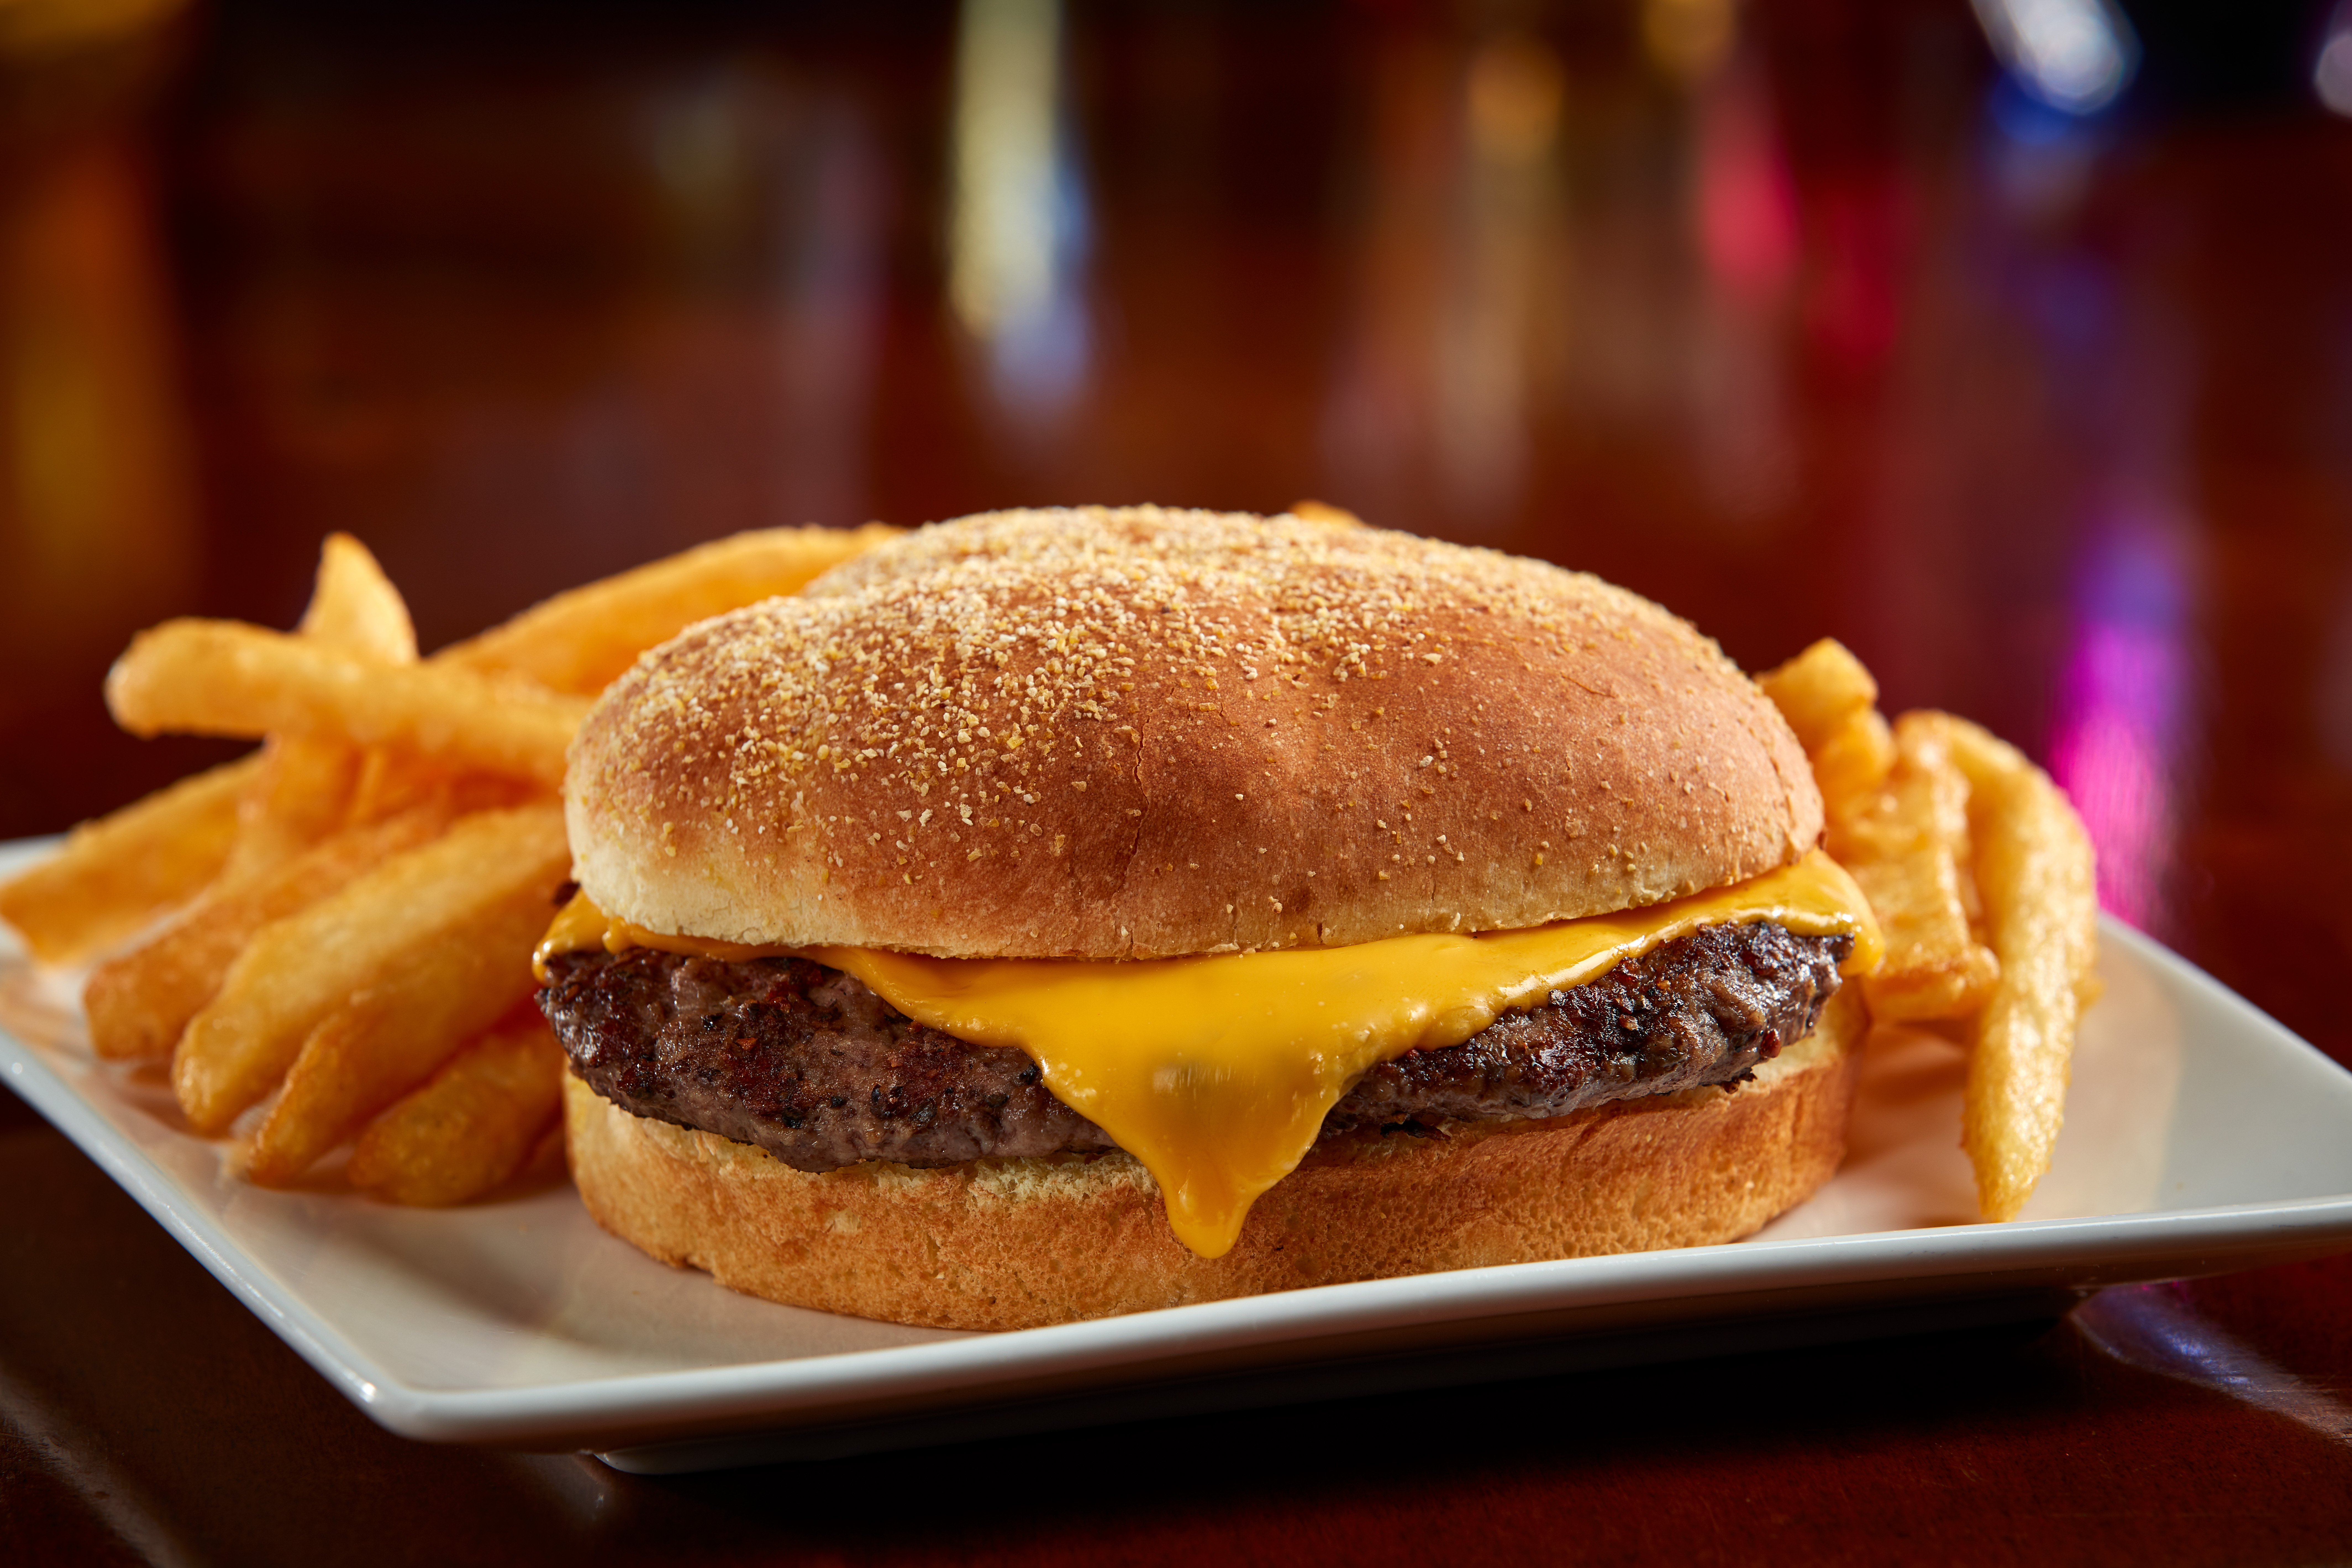 Grilled 4-oz burger with American cheese, served with French fries or fruit cup $7.99